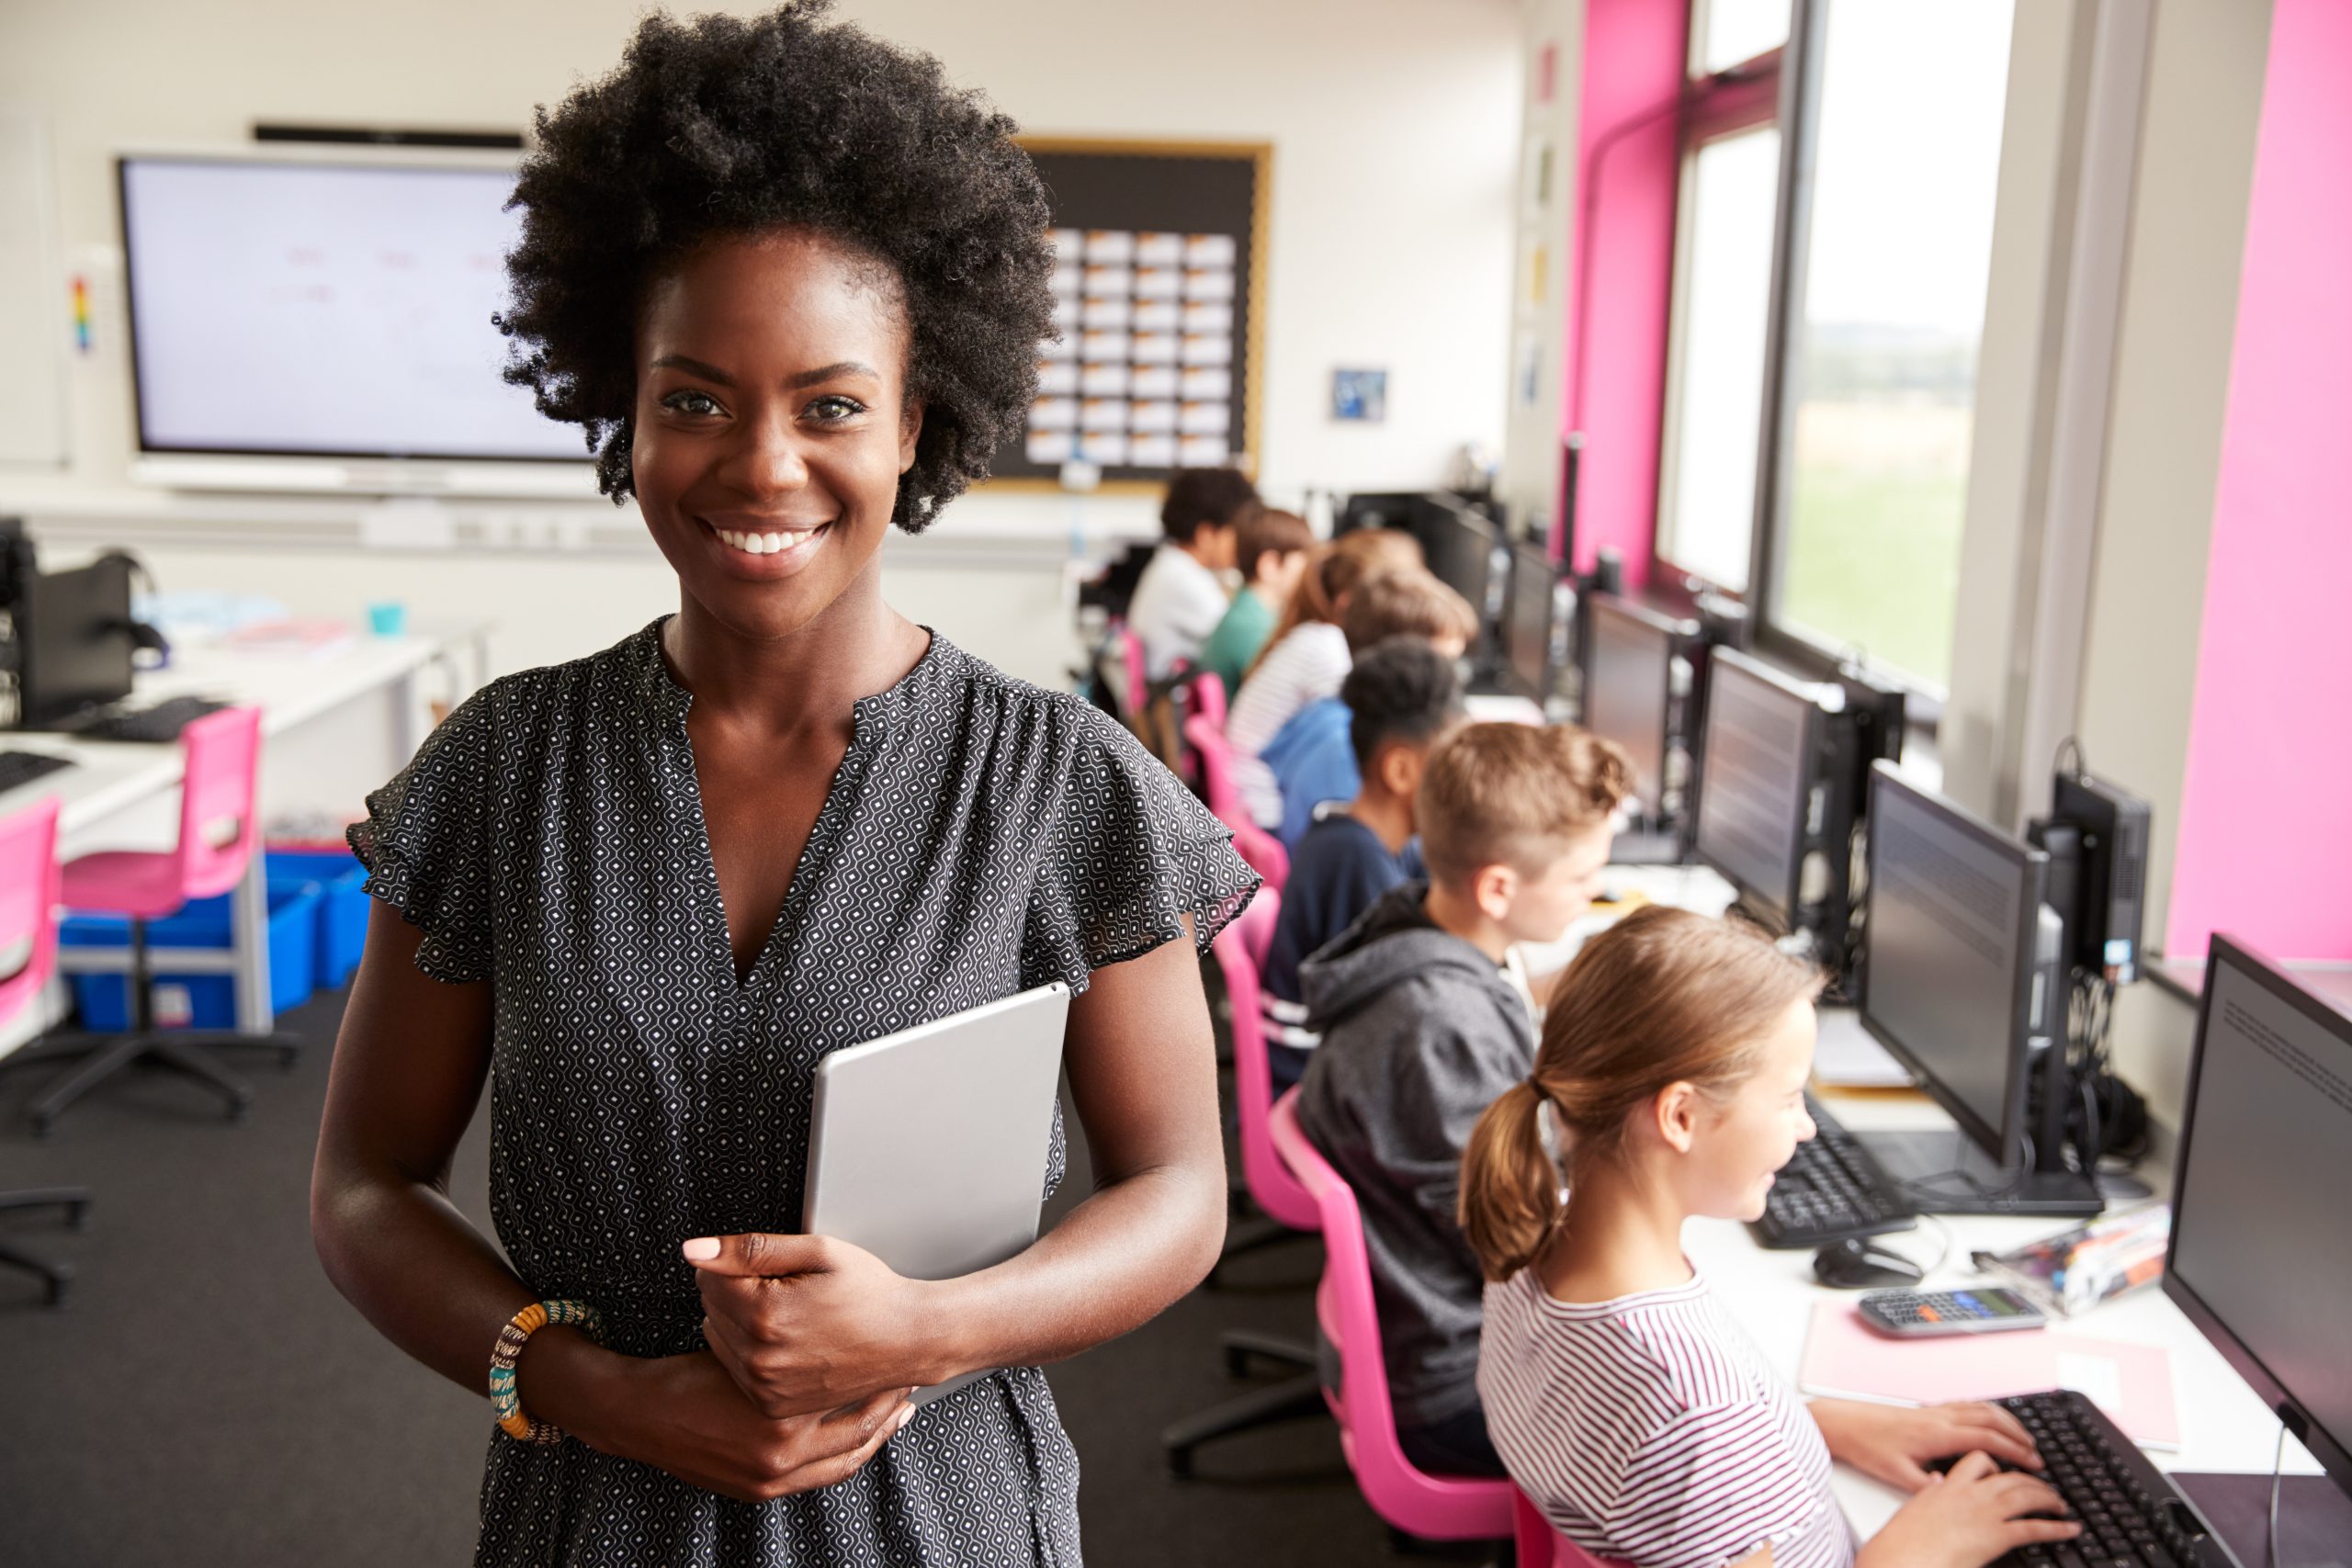 An image of a Black female teacher for our ranking of 30 Best Online Bachelor’s in Elementary Education or Early Childhood Education